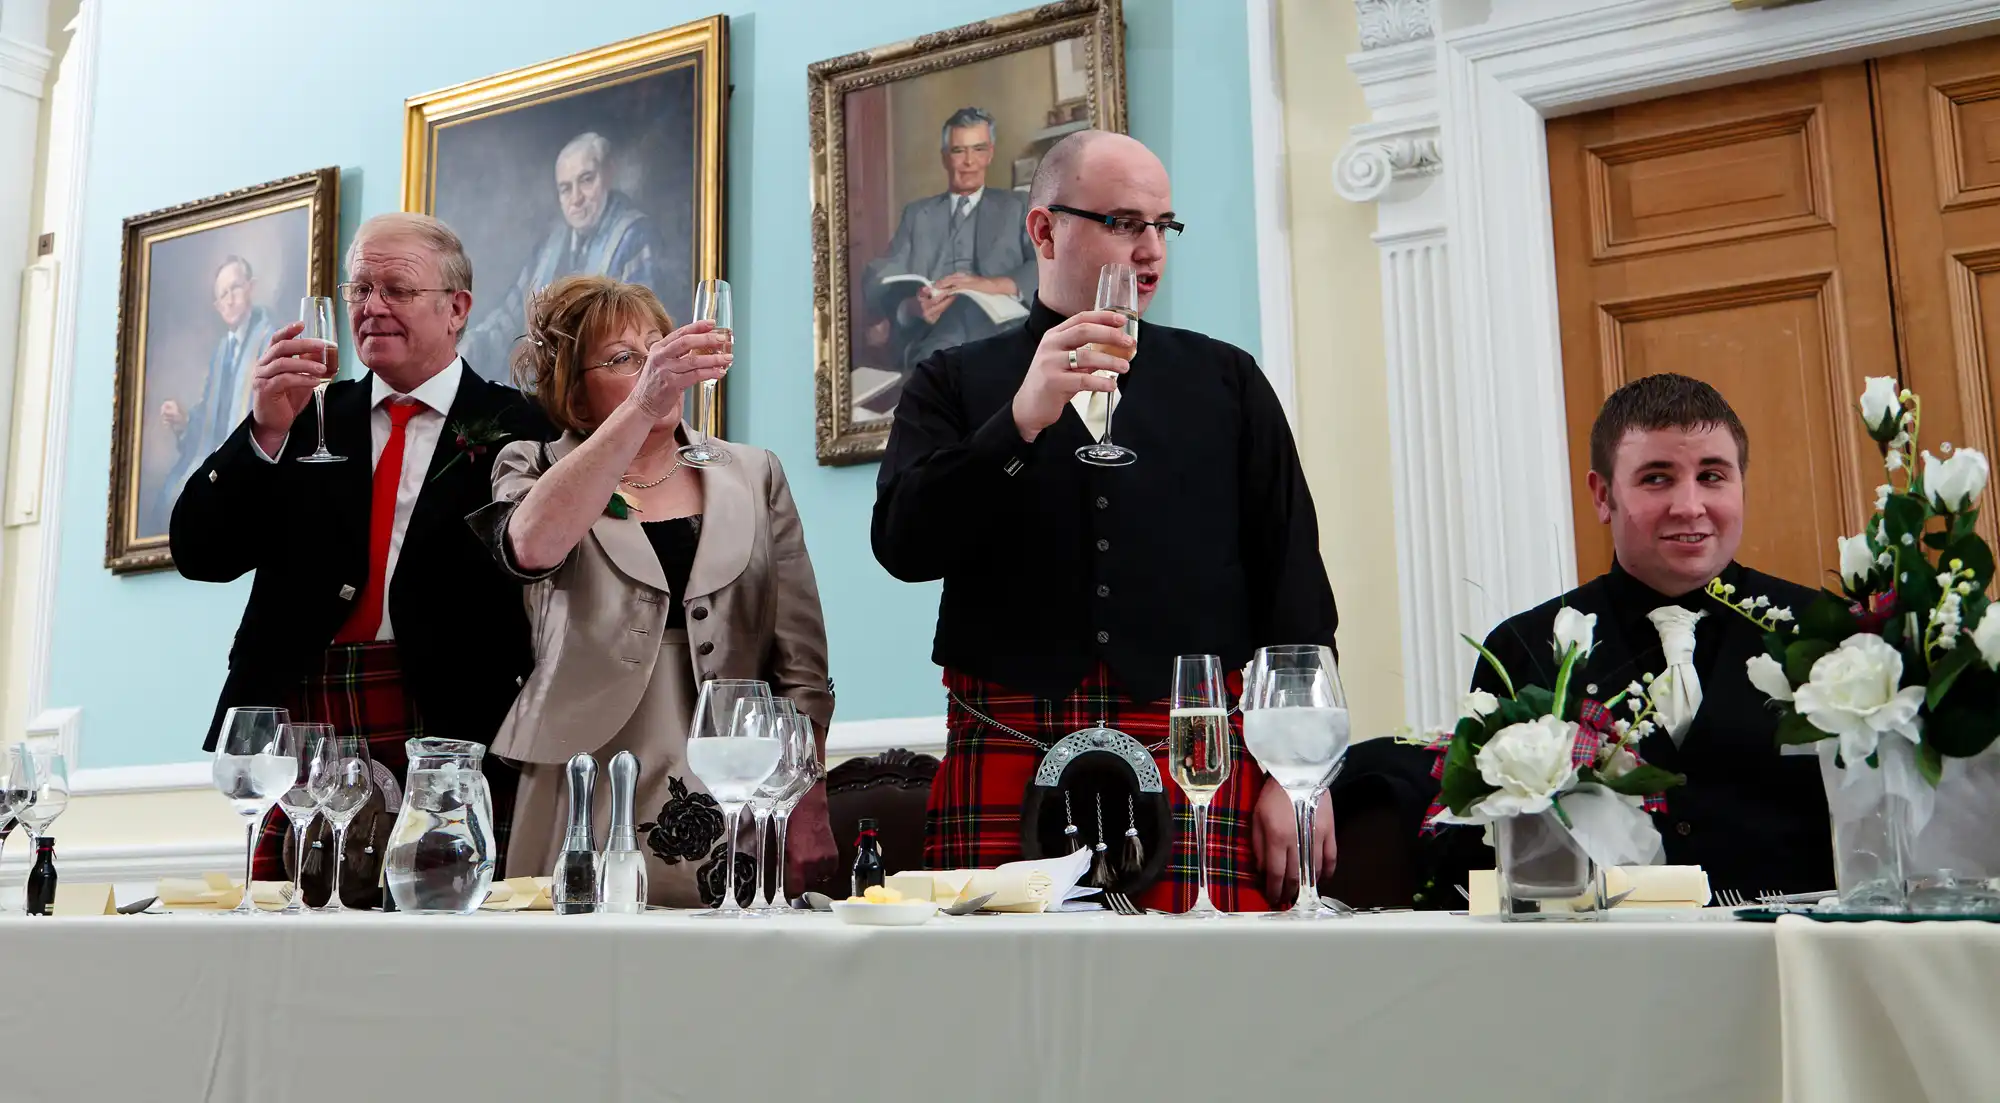 Four people at a formal event, two in kilts, raising glasses in a toast; portraits on the wall behind them.